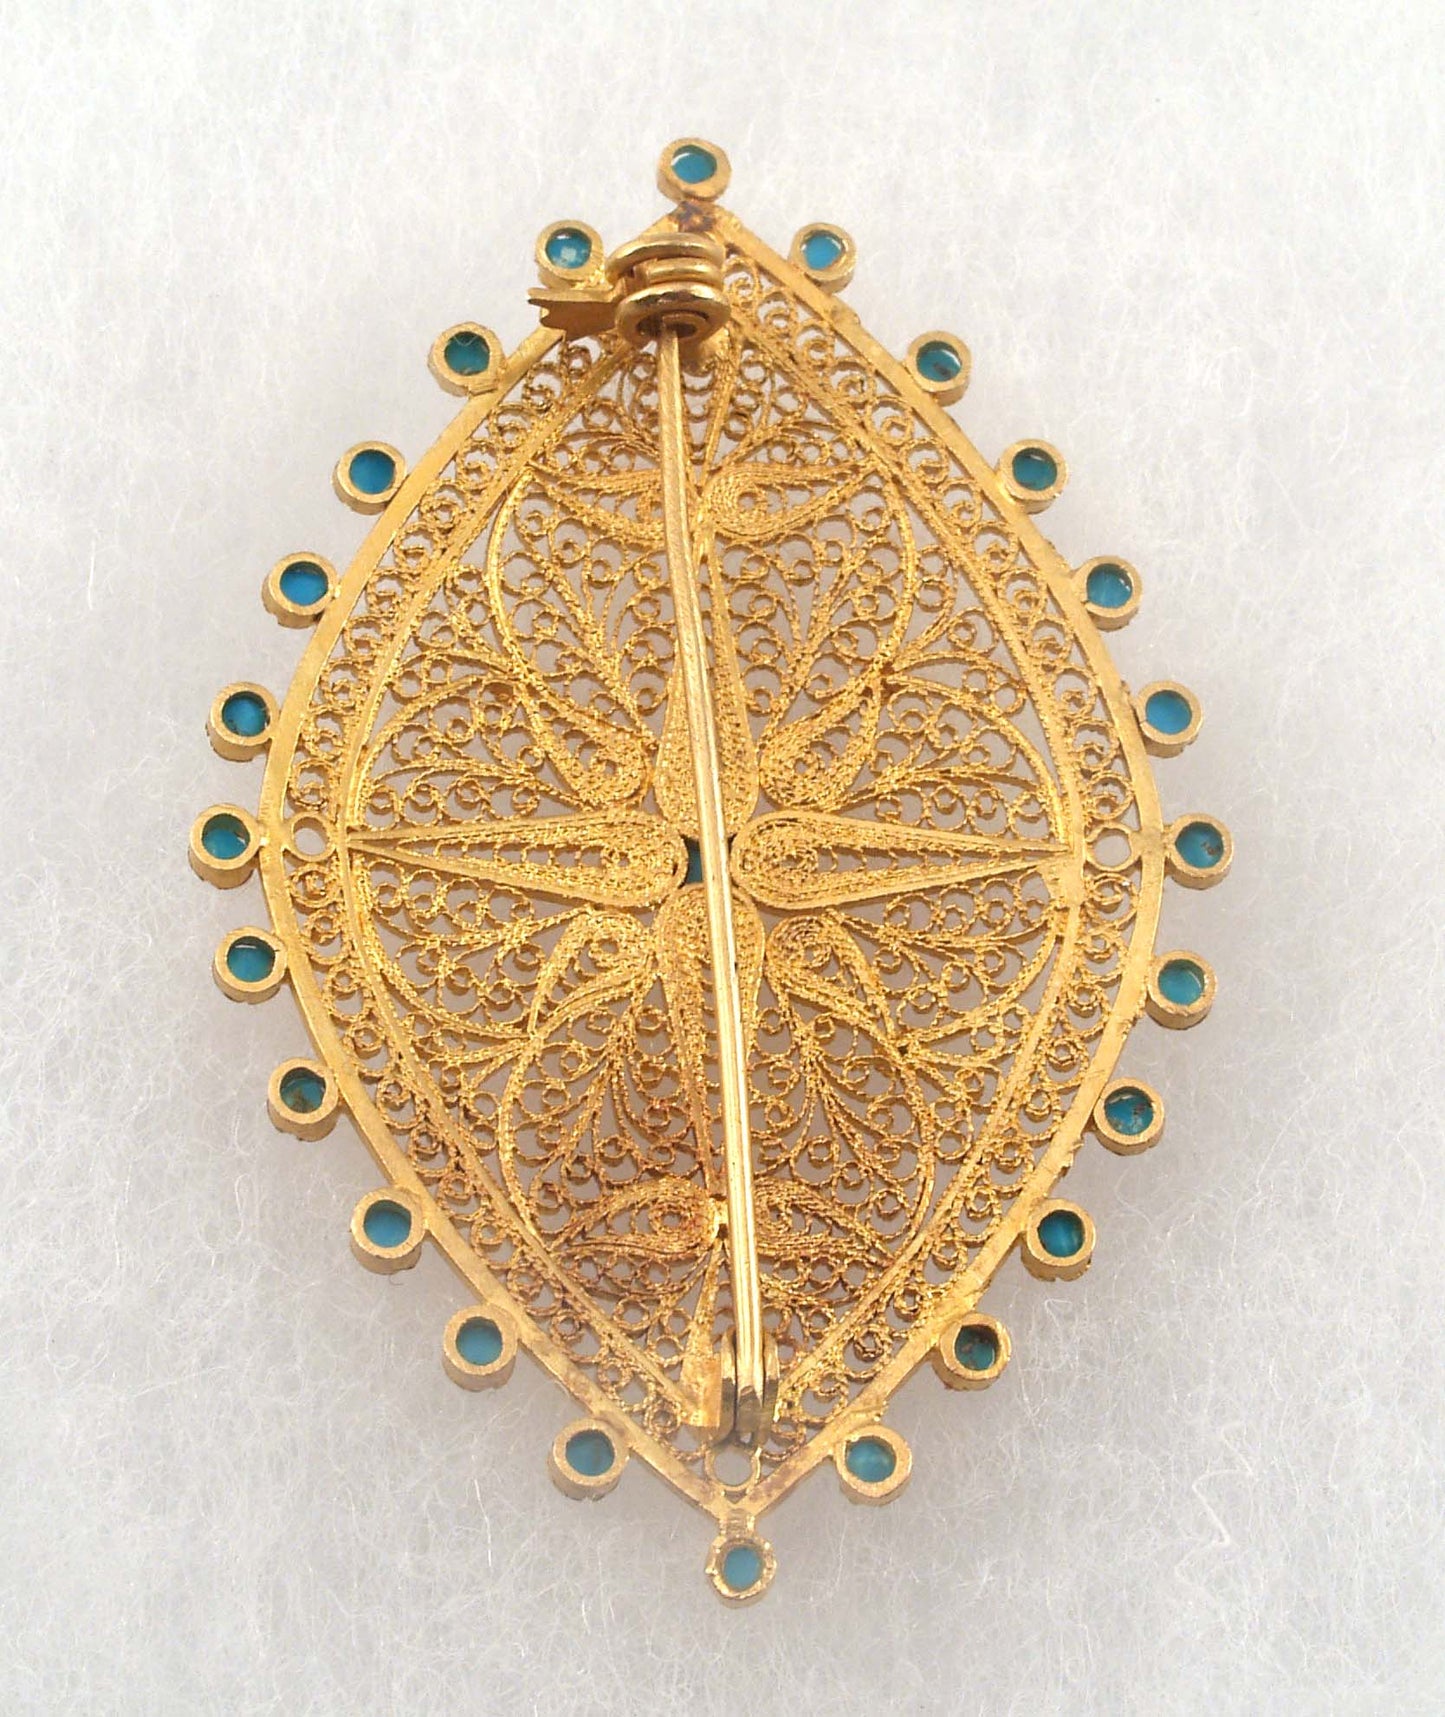 HE-Brooch in high karat gold filigree with turquoise